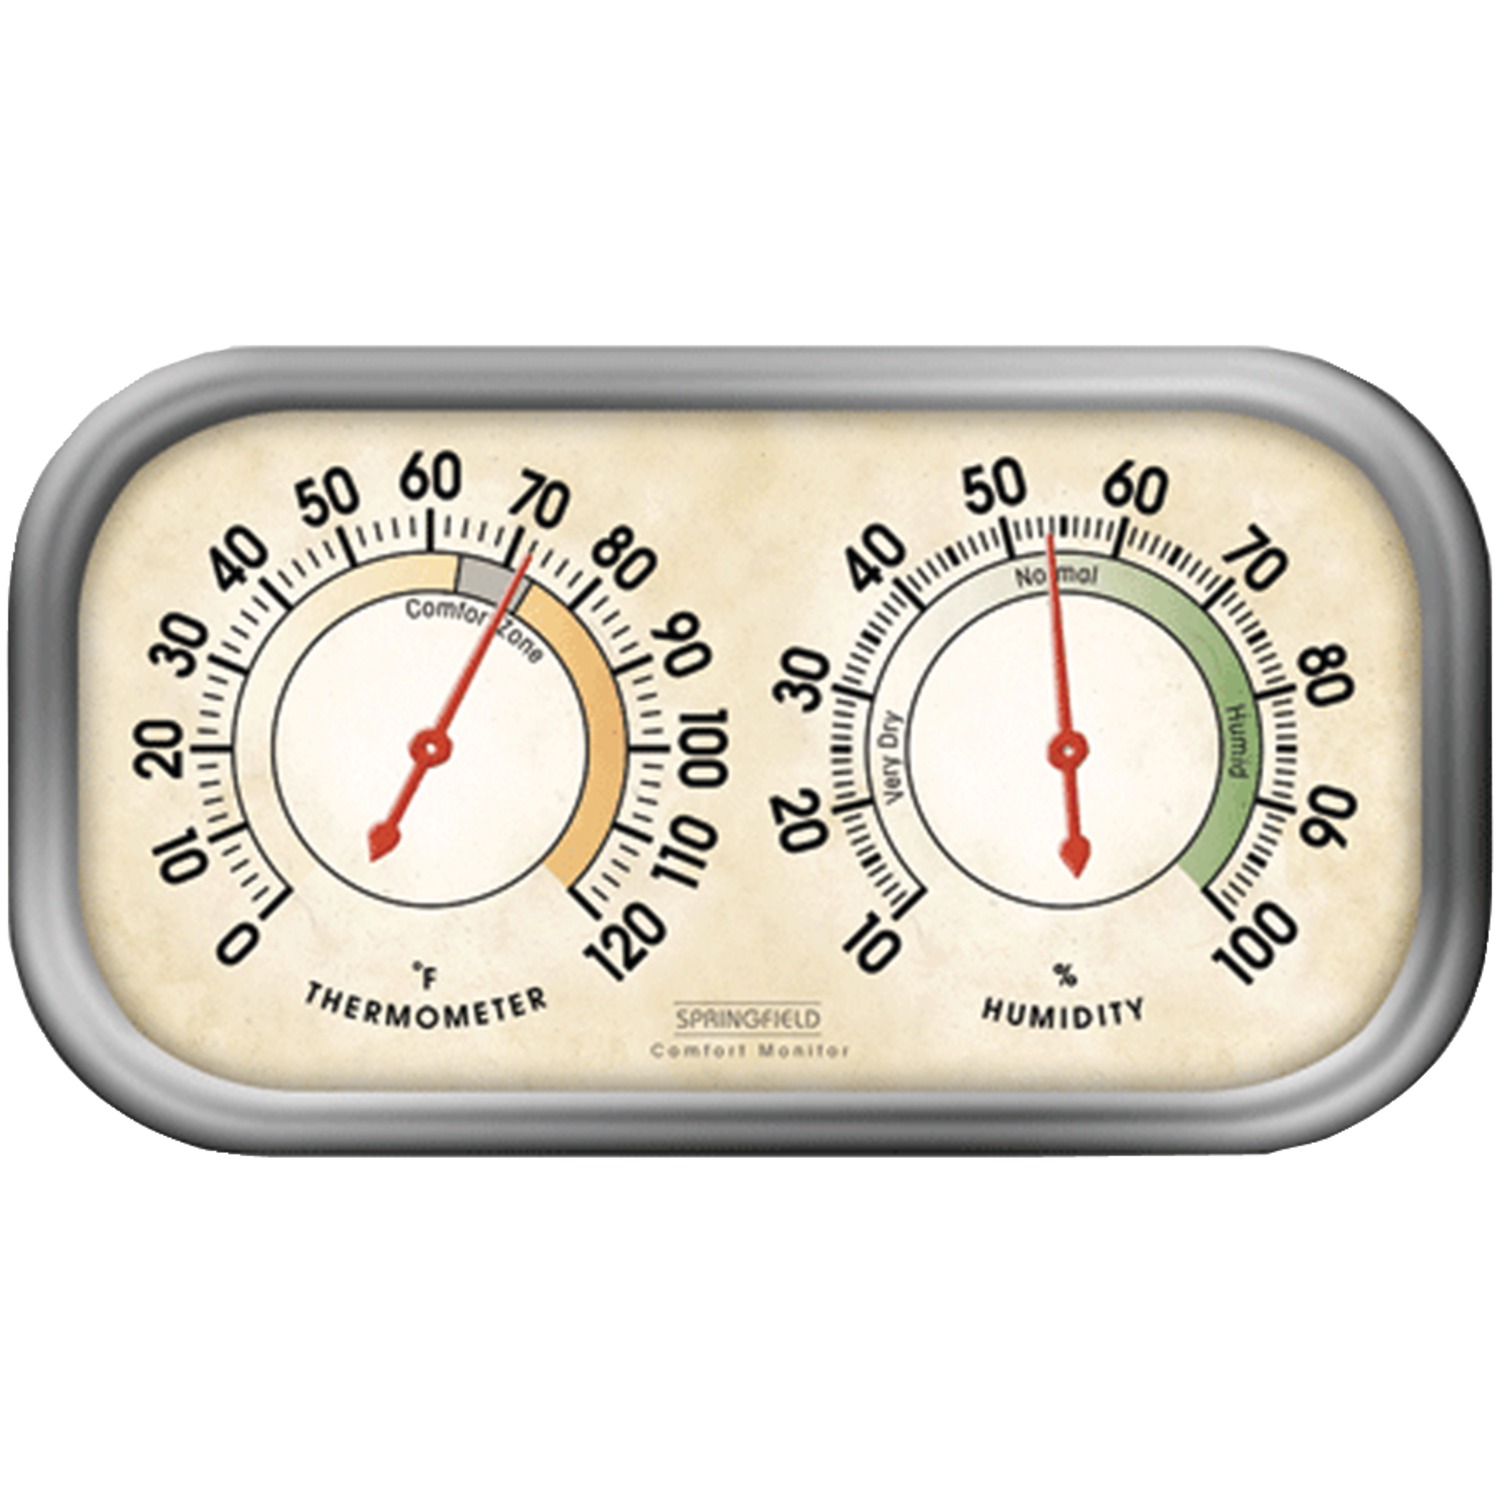 Springfield Precision 90113-1 Humidity Meter & Thermometer Combo - image 2 of 2